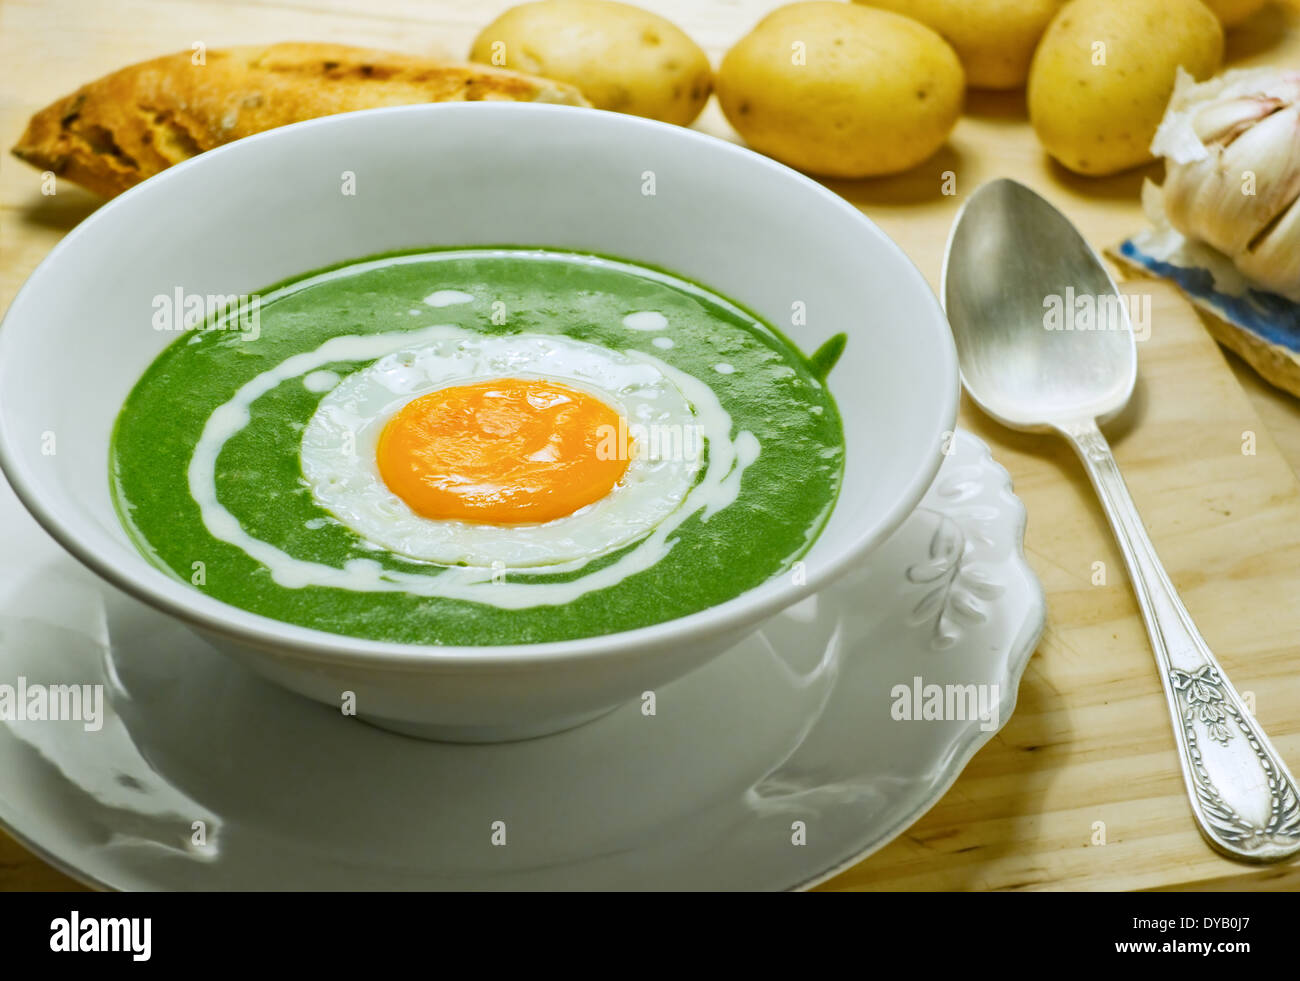 Nettle cream soup with egg cooked at low temperature. Stock Photo